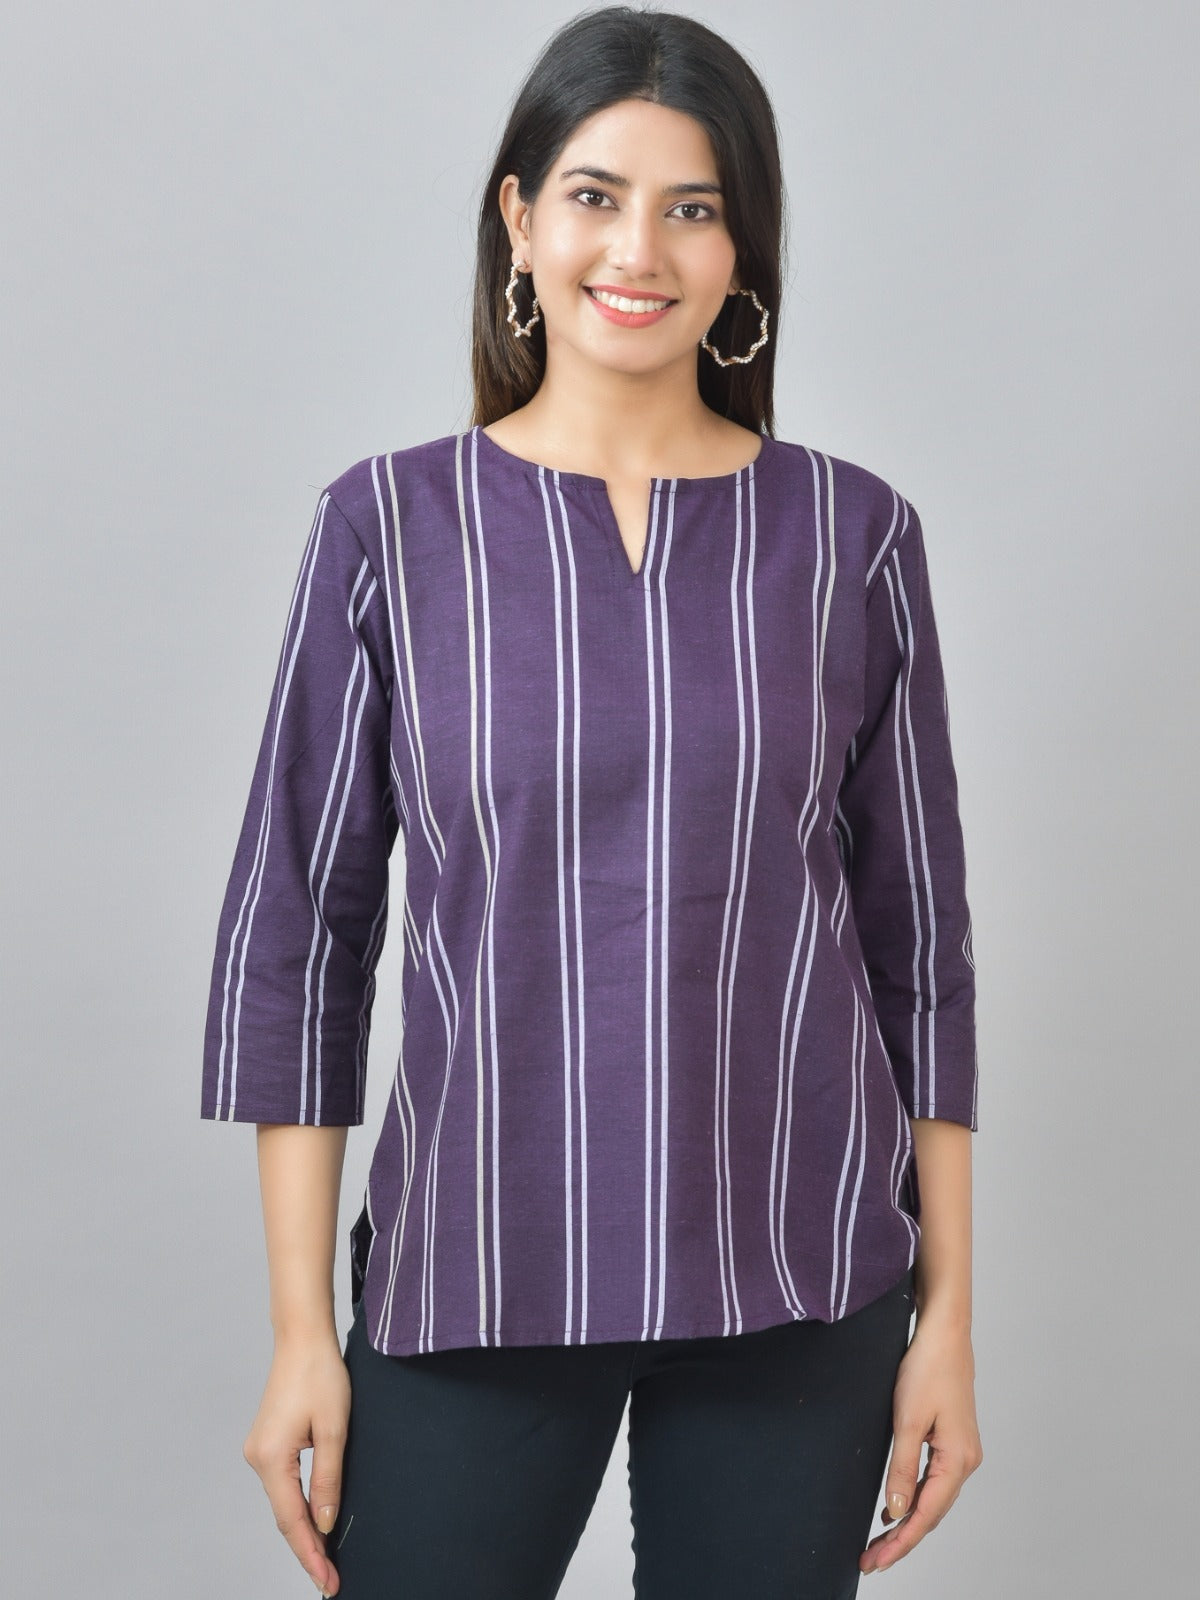 Pack Of 2 Purple And Dark Purple Striped Cotton Womens Top Combo